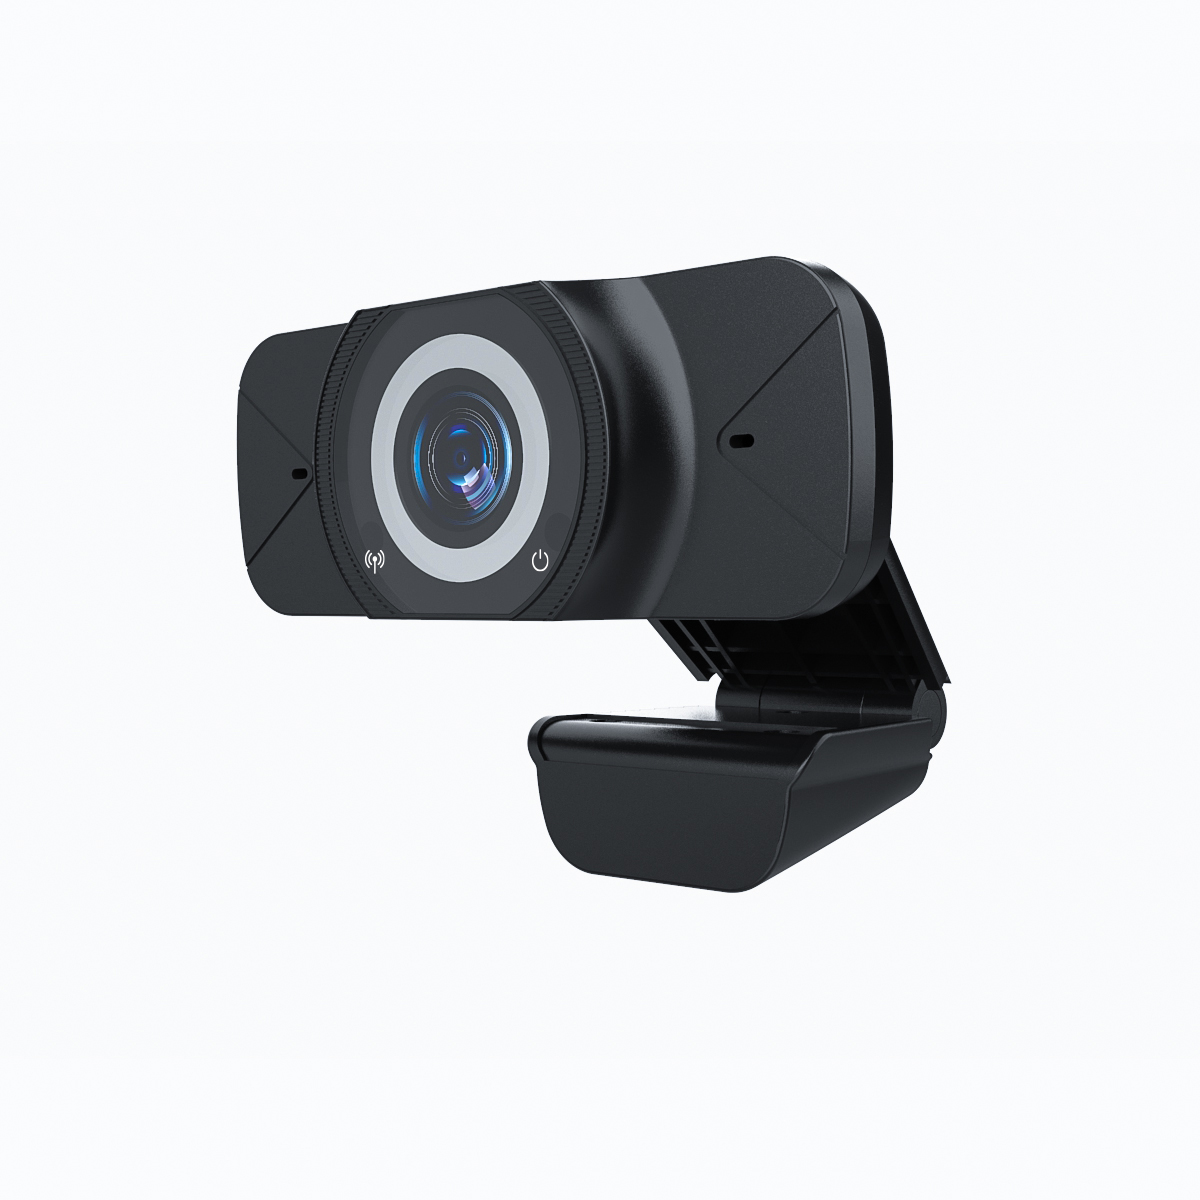 1080P Webcam w7 Hd Web-Camera WebCam Video Chat Recording Camera Usb With Hd Mic With Microphone For Pc Computer